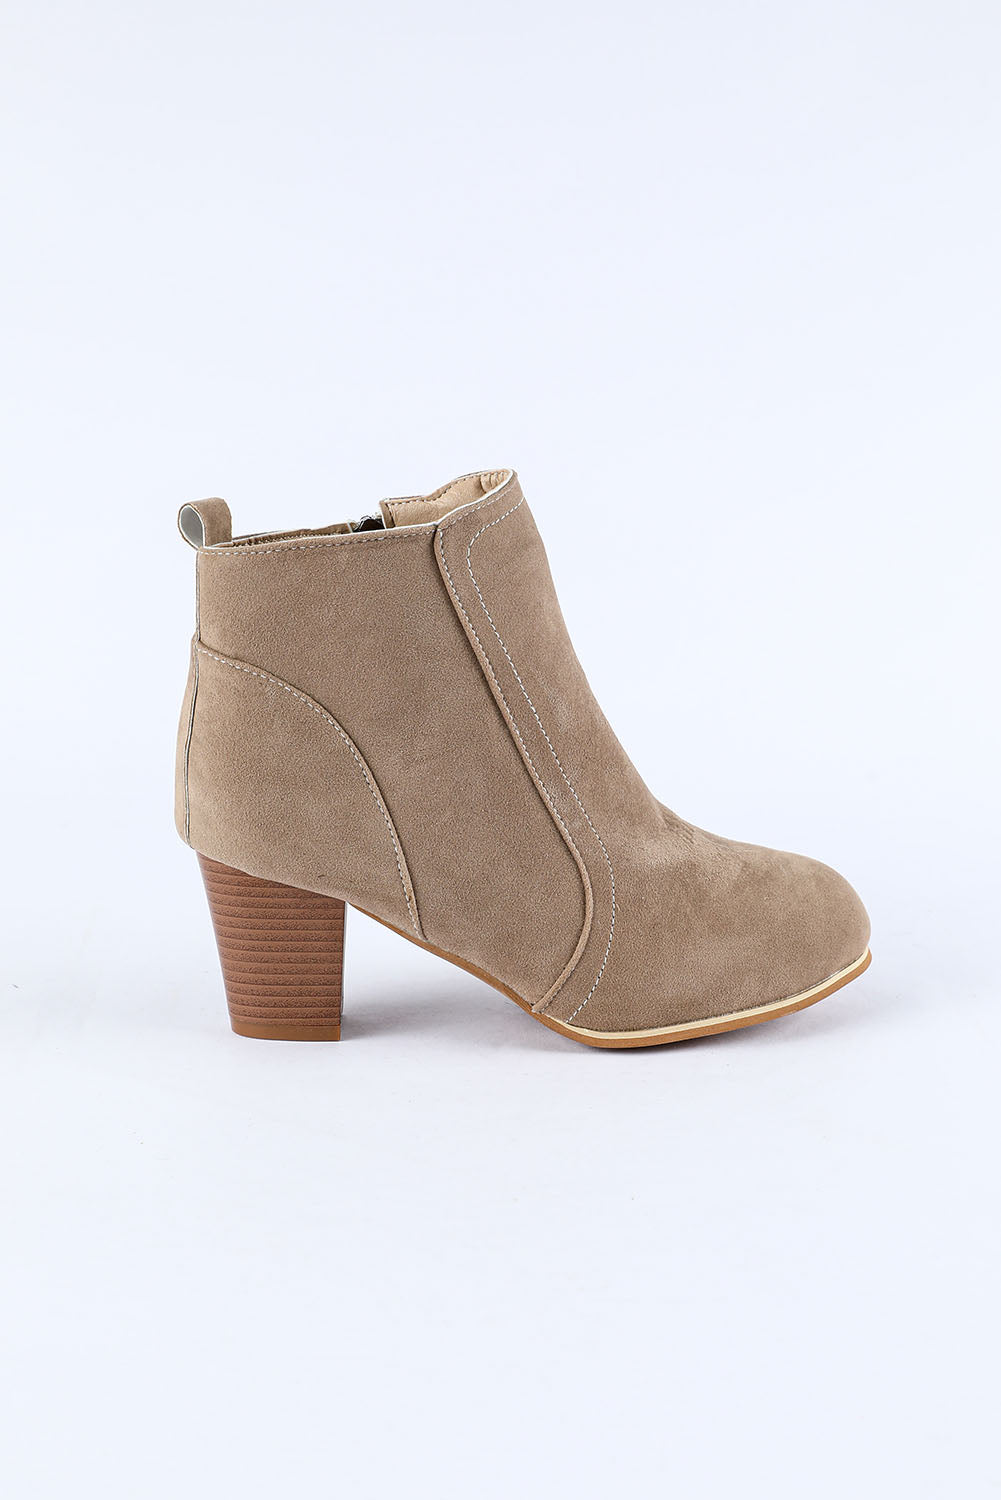 Faux Suede Size Zip Heeled Booties - women's boots at TFC&H Co.